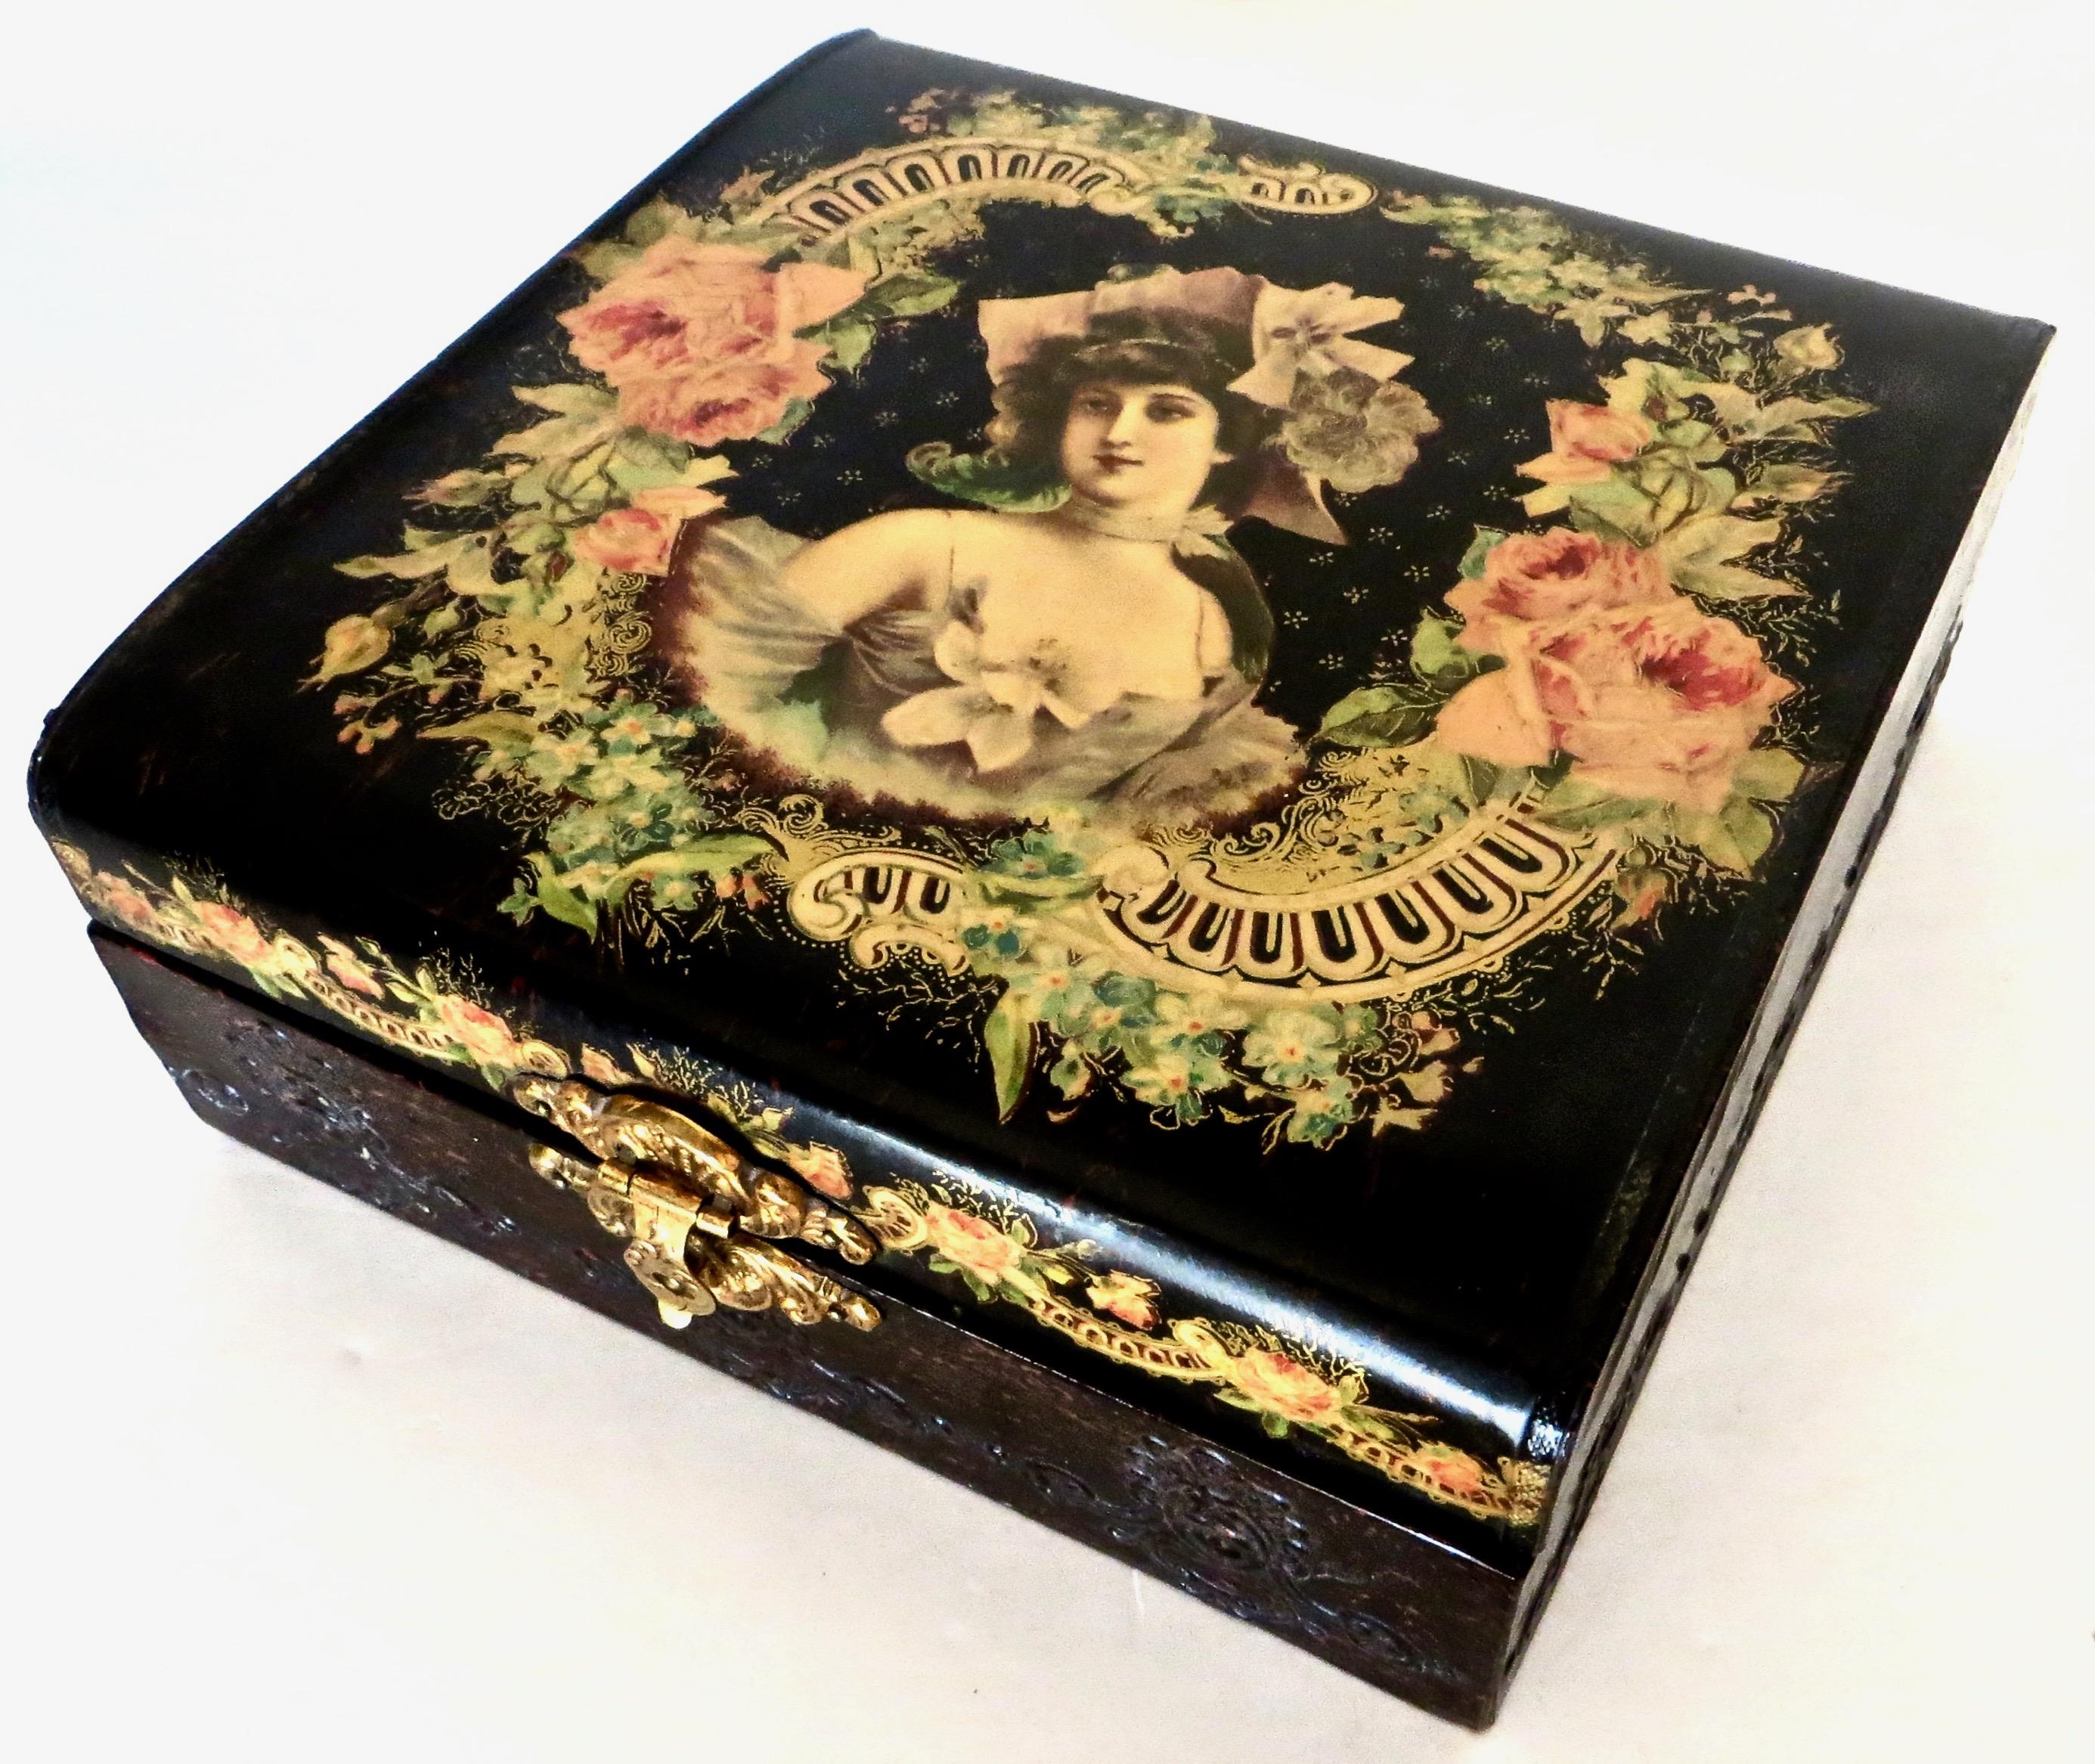 From the same estate come two American, late 19th century matching Victorian celluloid boxes; typical of that era, they are highly decorated. The top of the jewelry box shows a pretty young lady; incorporating a floral motif with pink roses and a